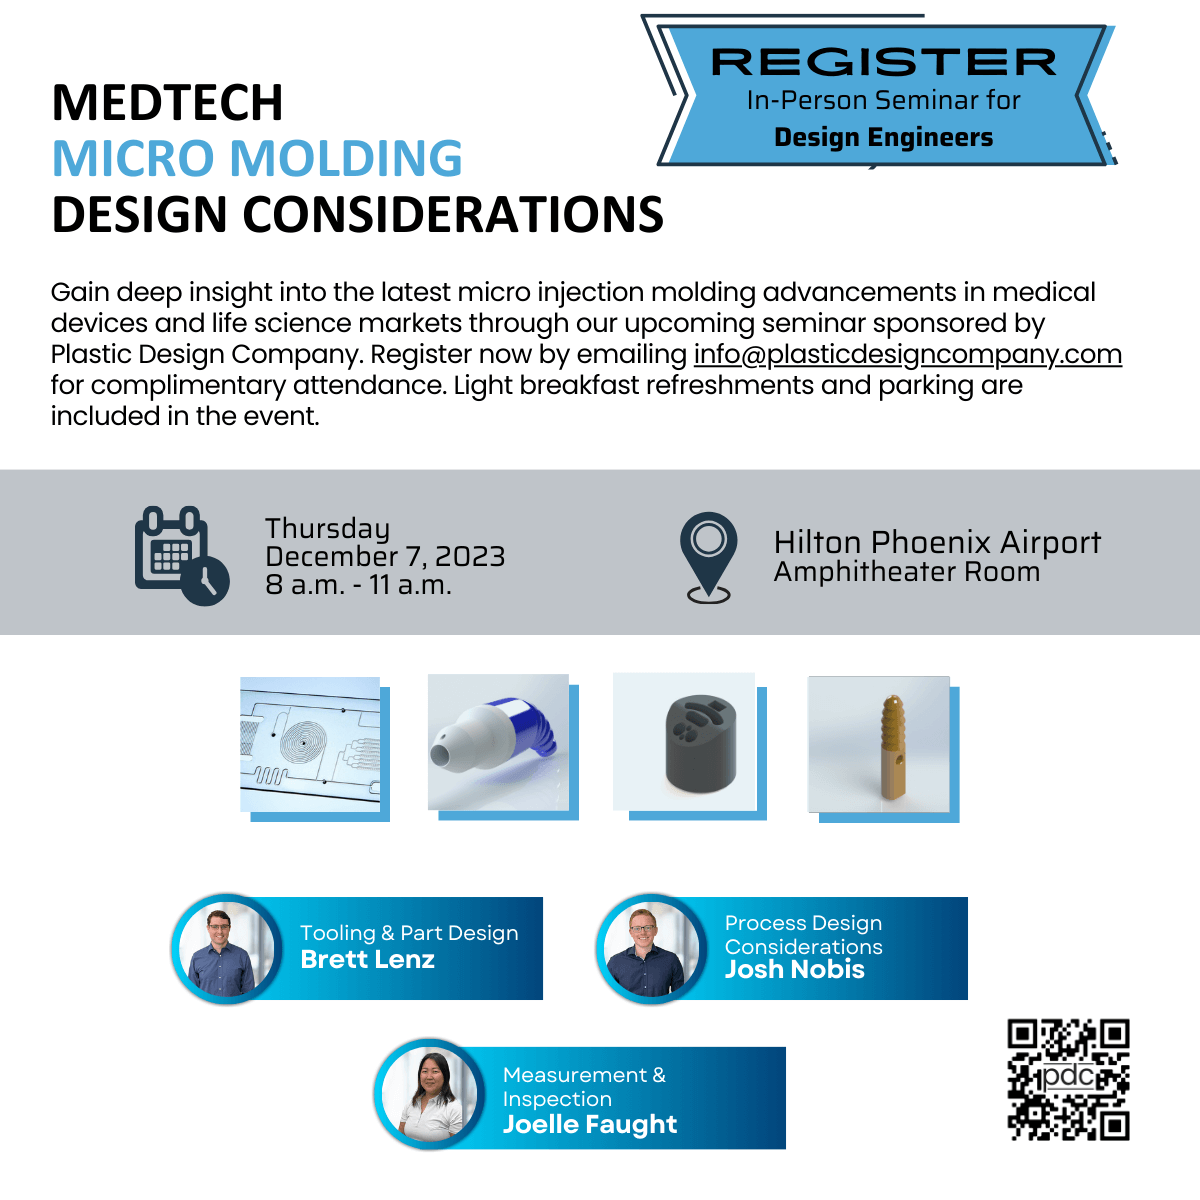 MedTech Micro Molding Design Considerations event poster